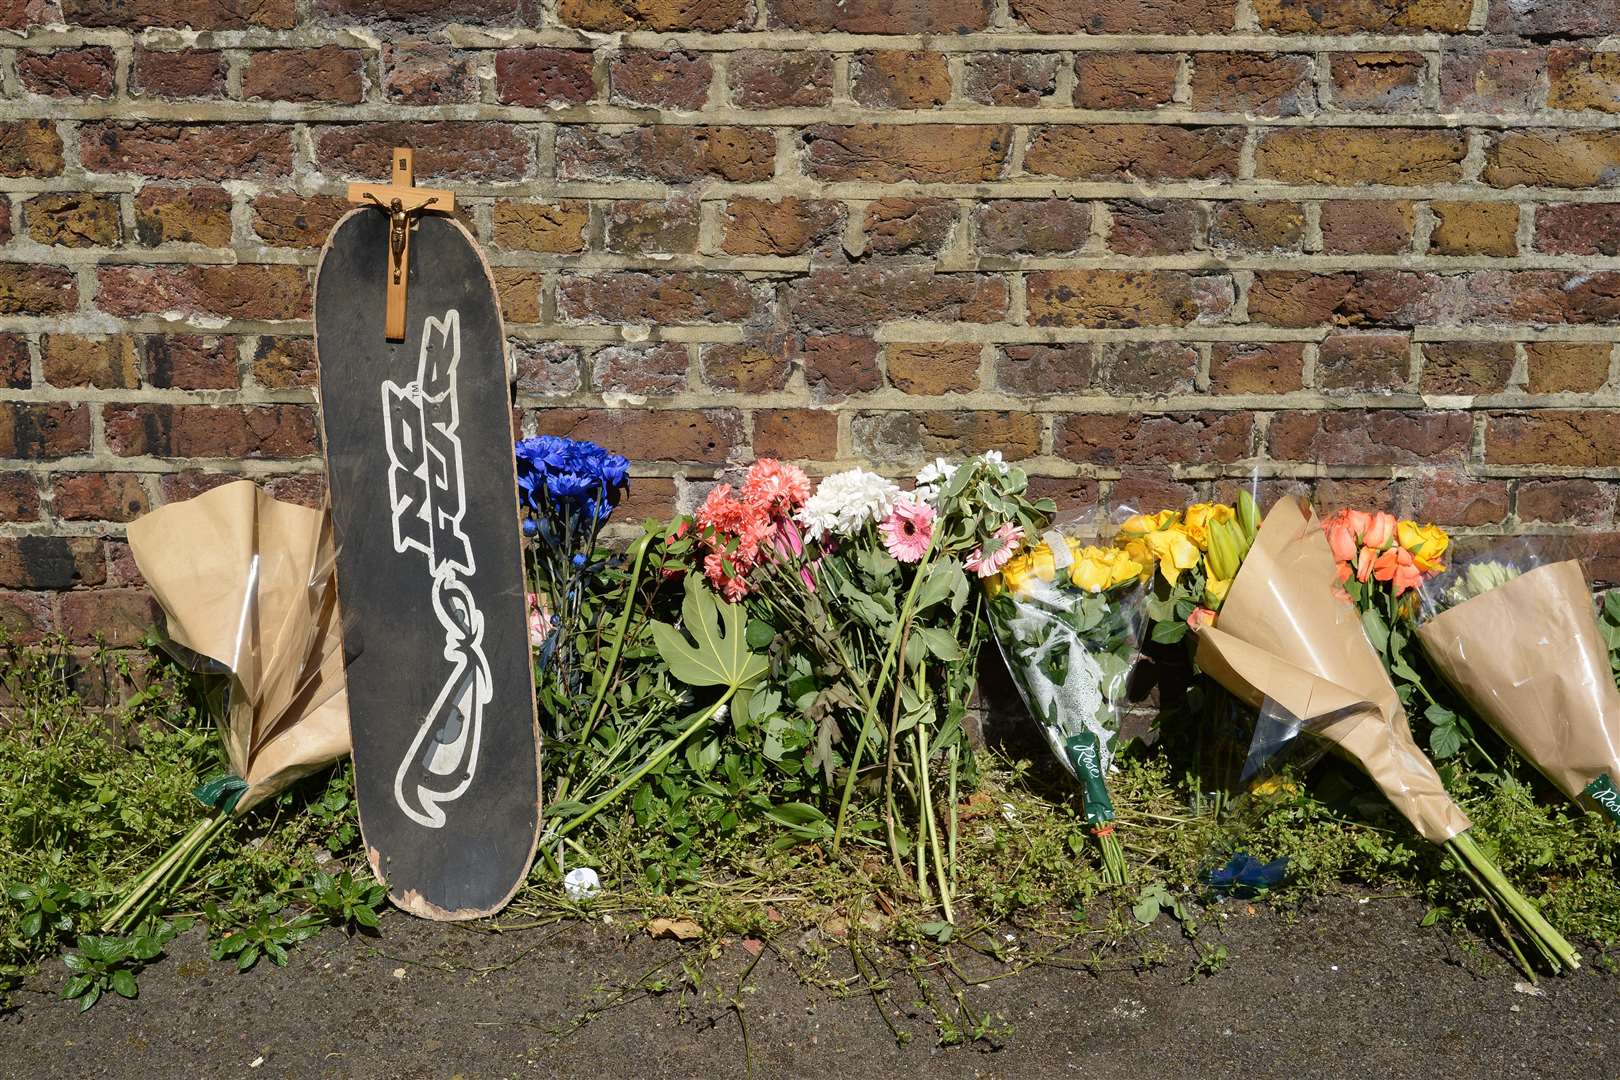 Flowers and tributes left to Phillip Marshall at the Foord Road viaduct